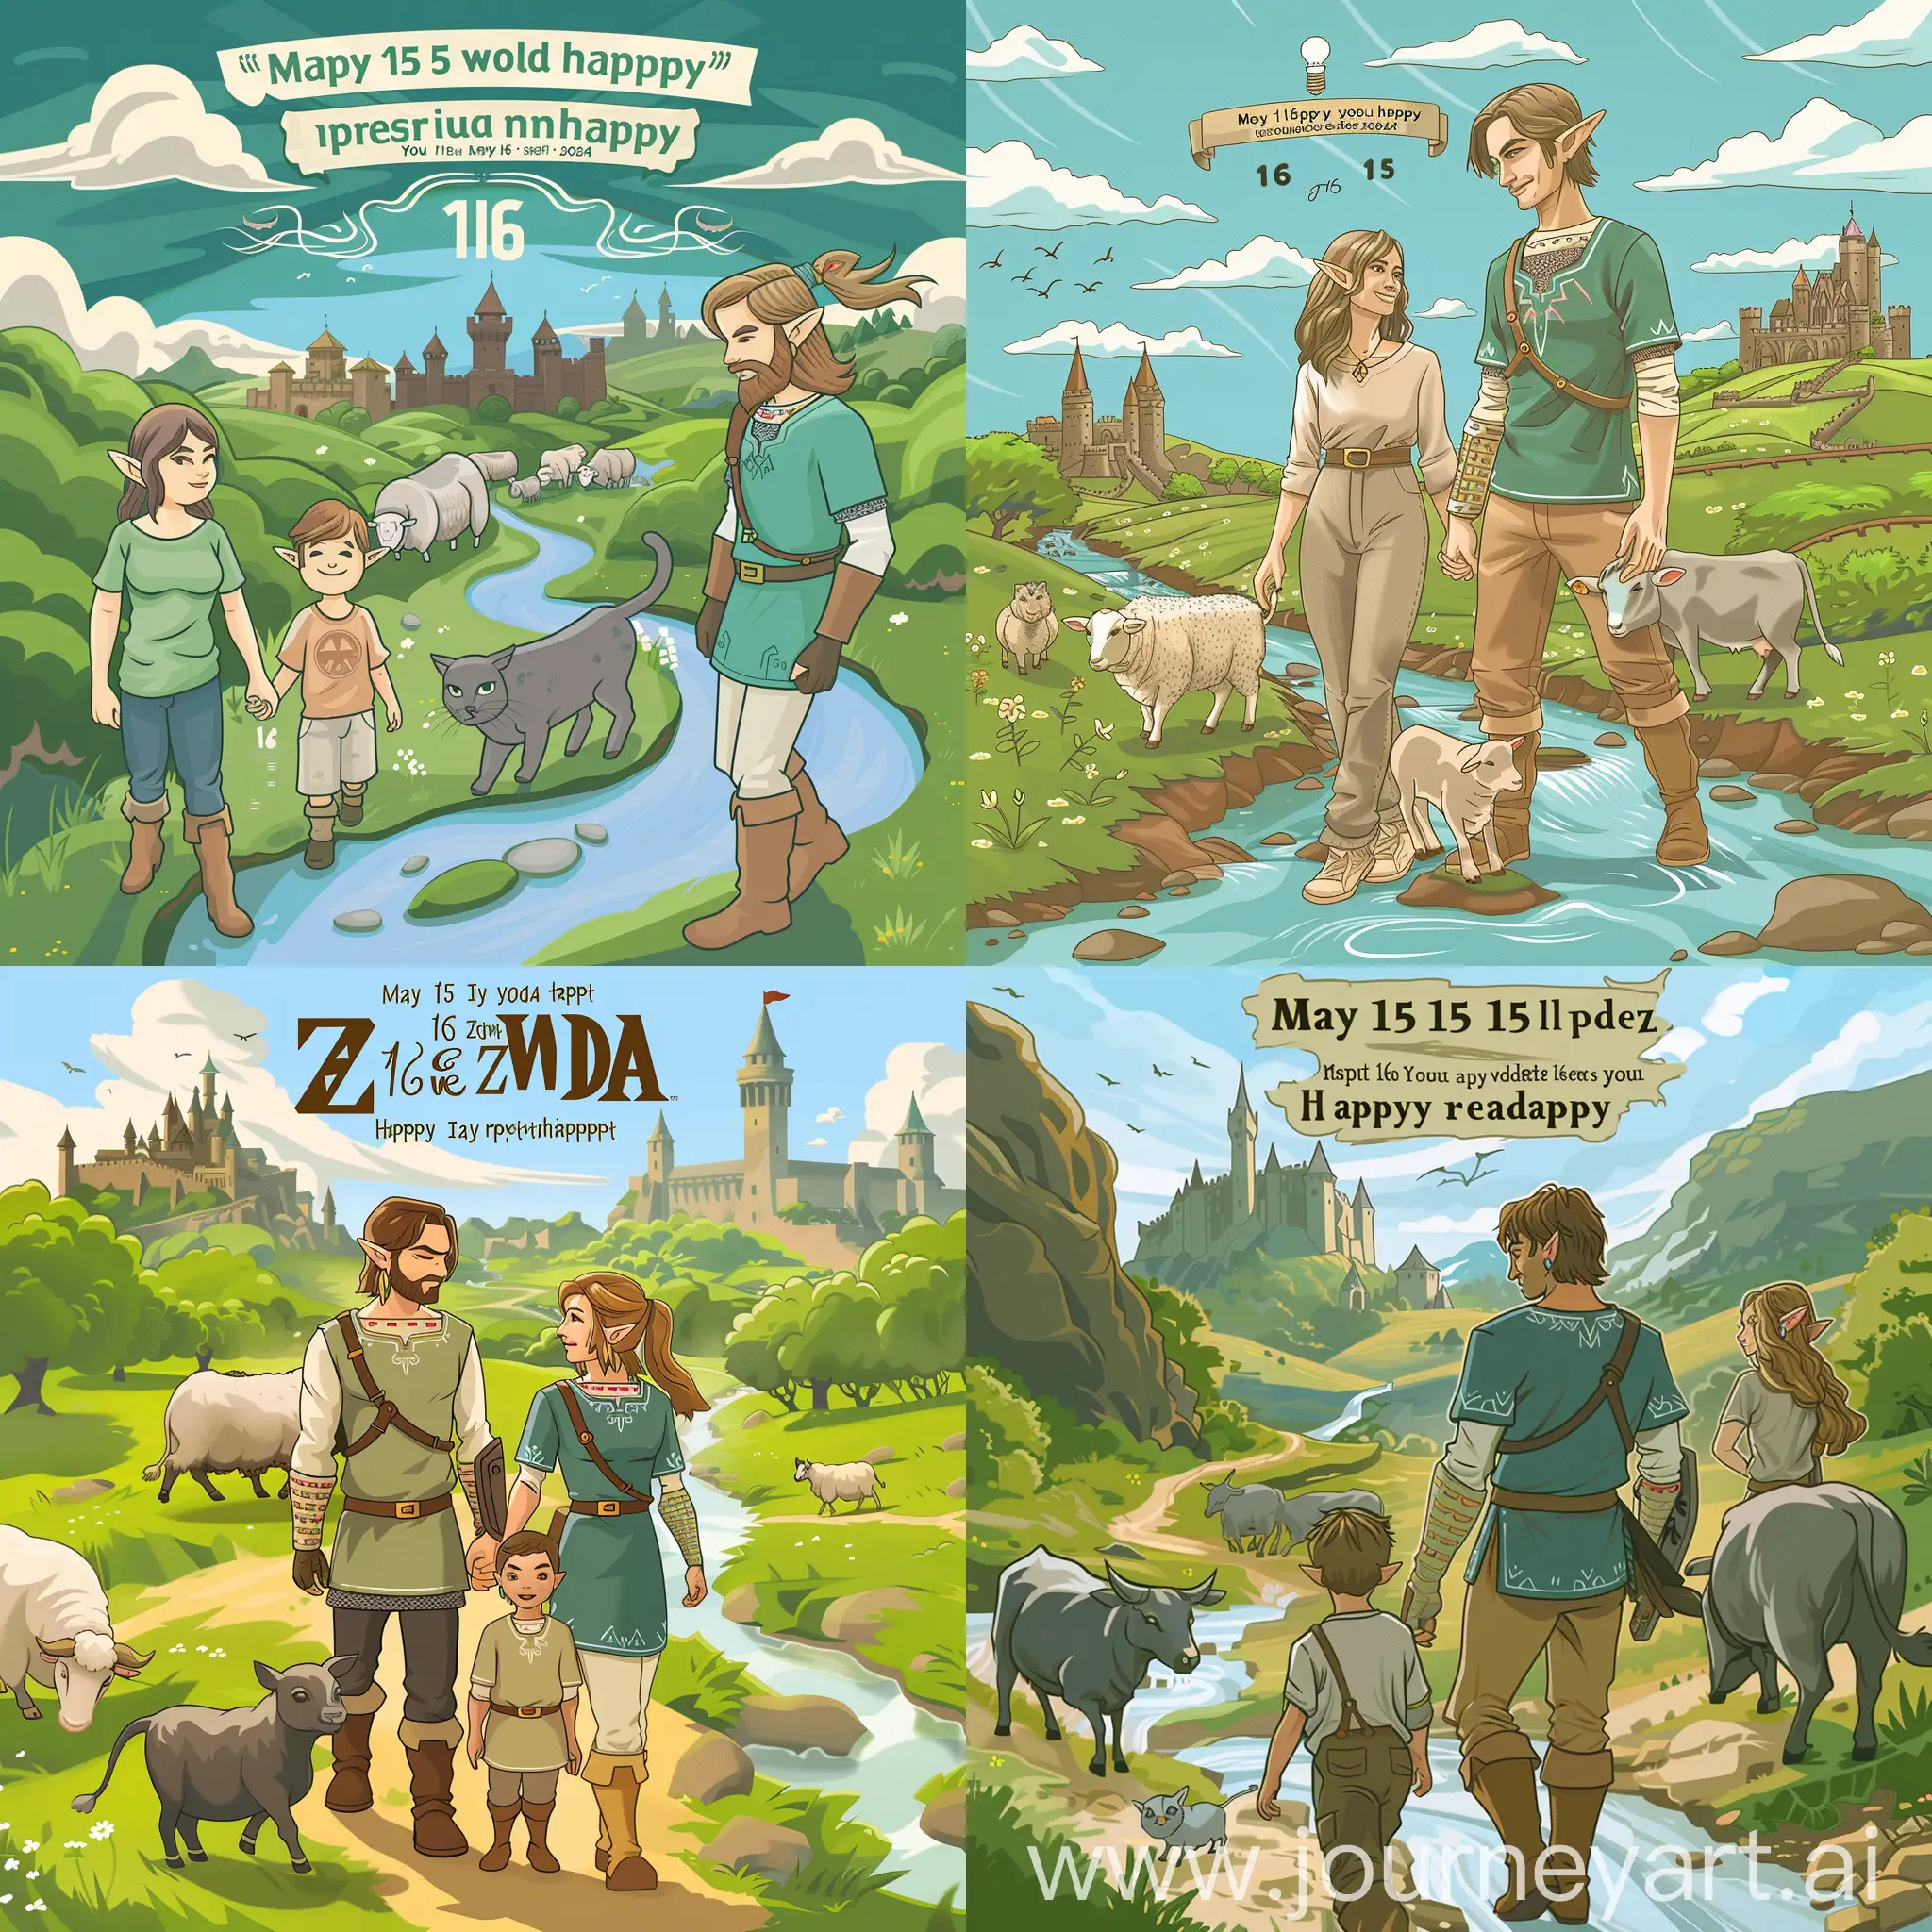 You are an excellent graphic designer. May 15th is the 16th wedding anniversary of my wife and me. Please help me generate a Zelda style picture to celebrate our love, and write a short message on the picture"May 15th 2024,Happy 16th wedding anniversary ,you are my greatest happiness" ,In the distance are castles, streams and walking cattle and sheep，and a son beside mom，and a gray cat with the family